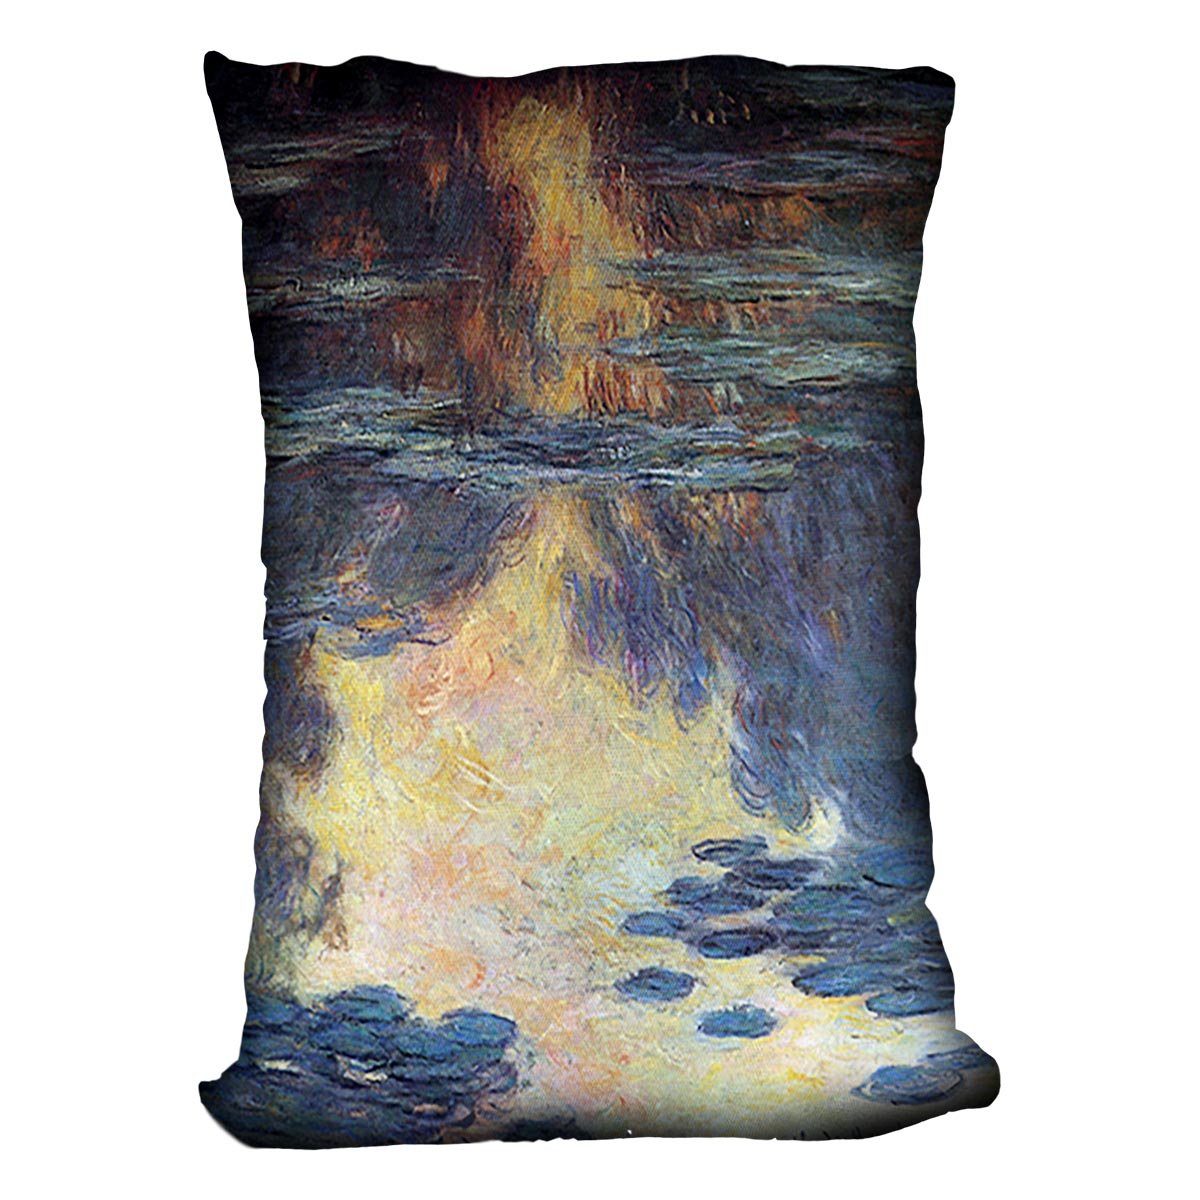 Water lilies water landscape 2 by Monet Throw Pillow